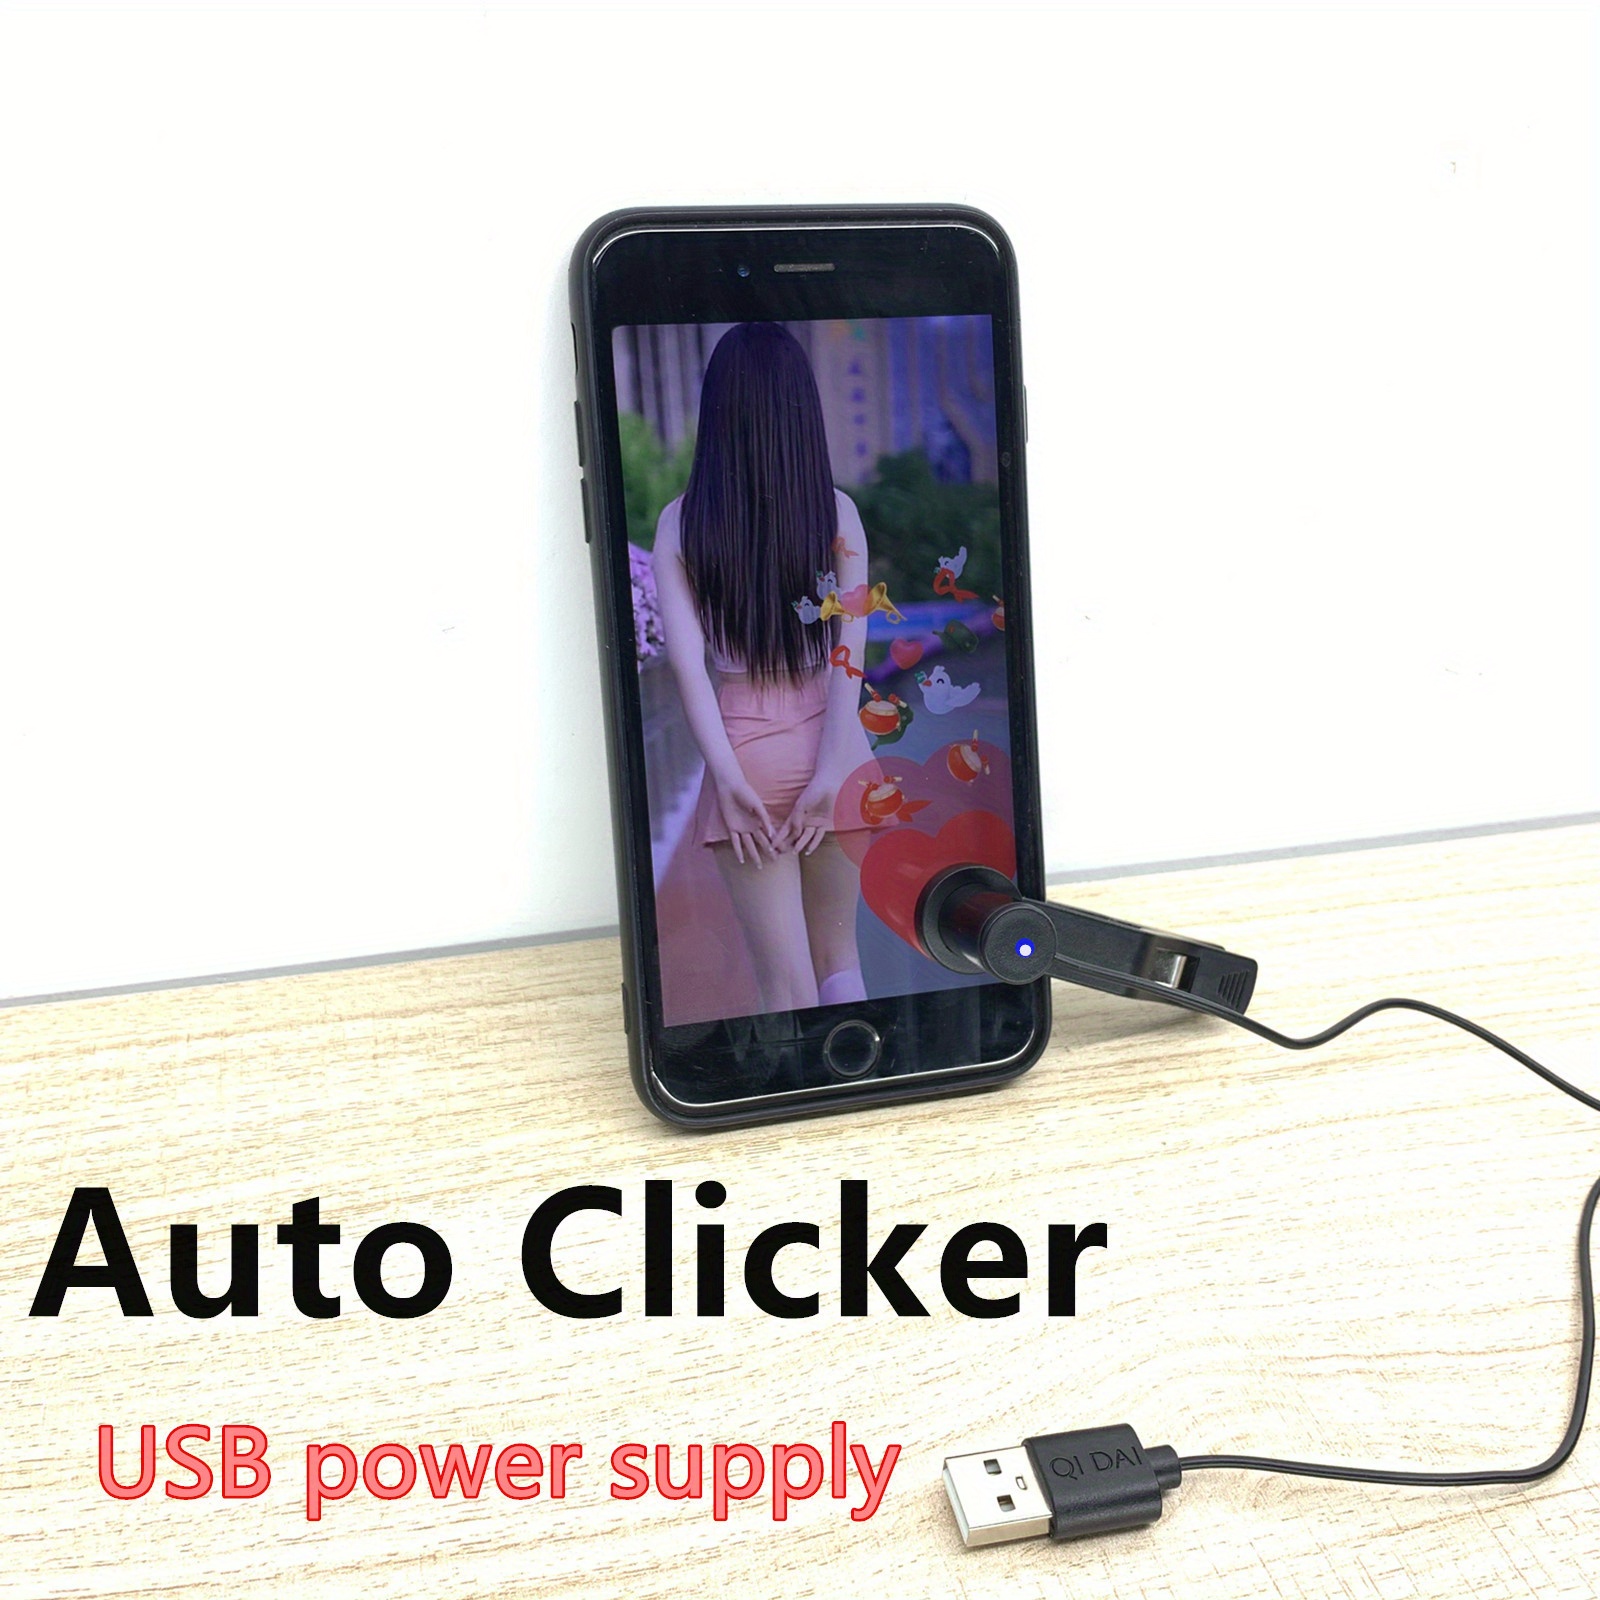 Auto Clicker for iOS iPhone iPad iPod (2022) Auto Click & Tap for your  iPhone! Works on Any App! 